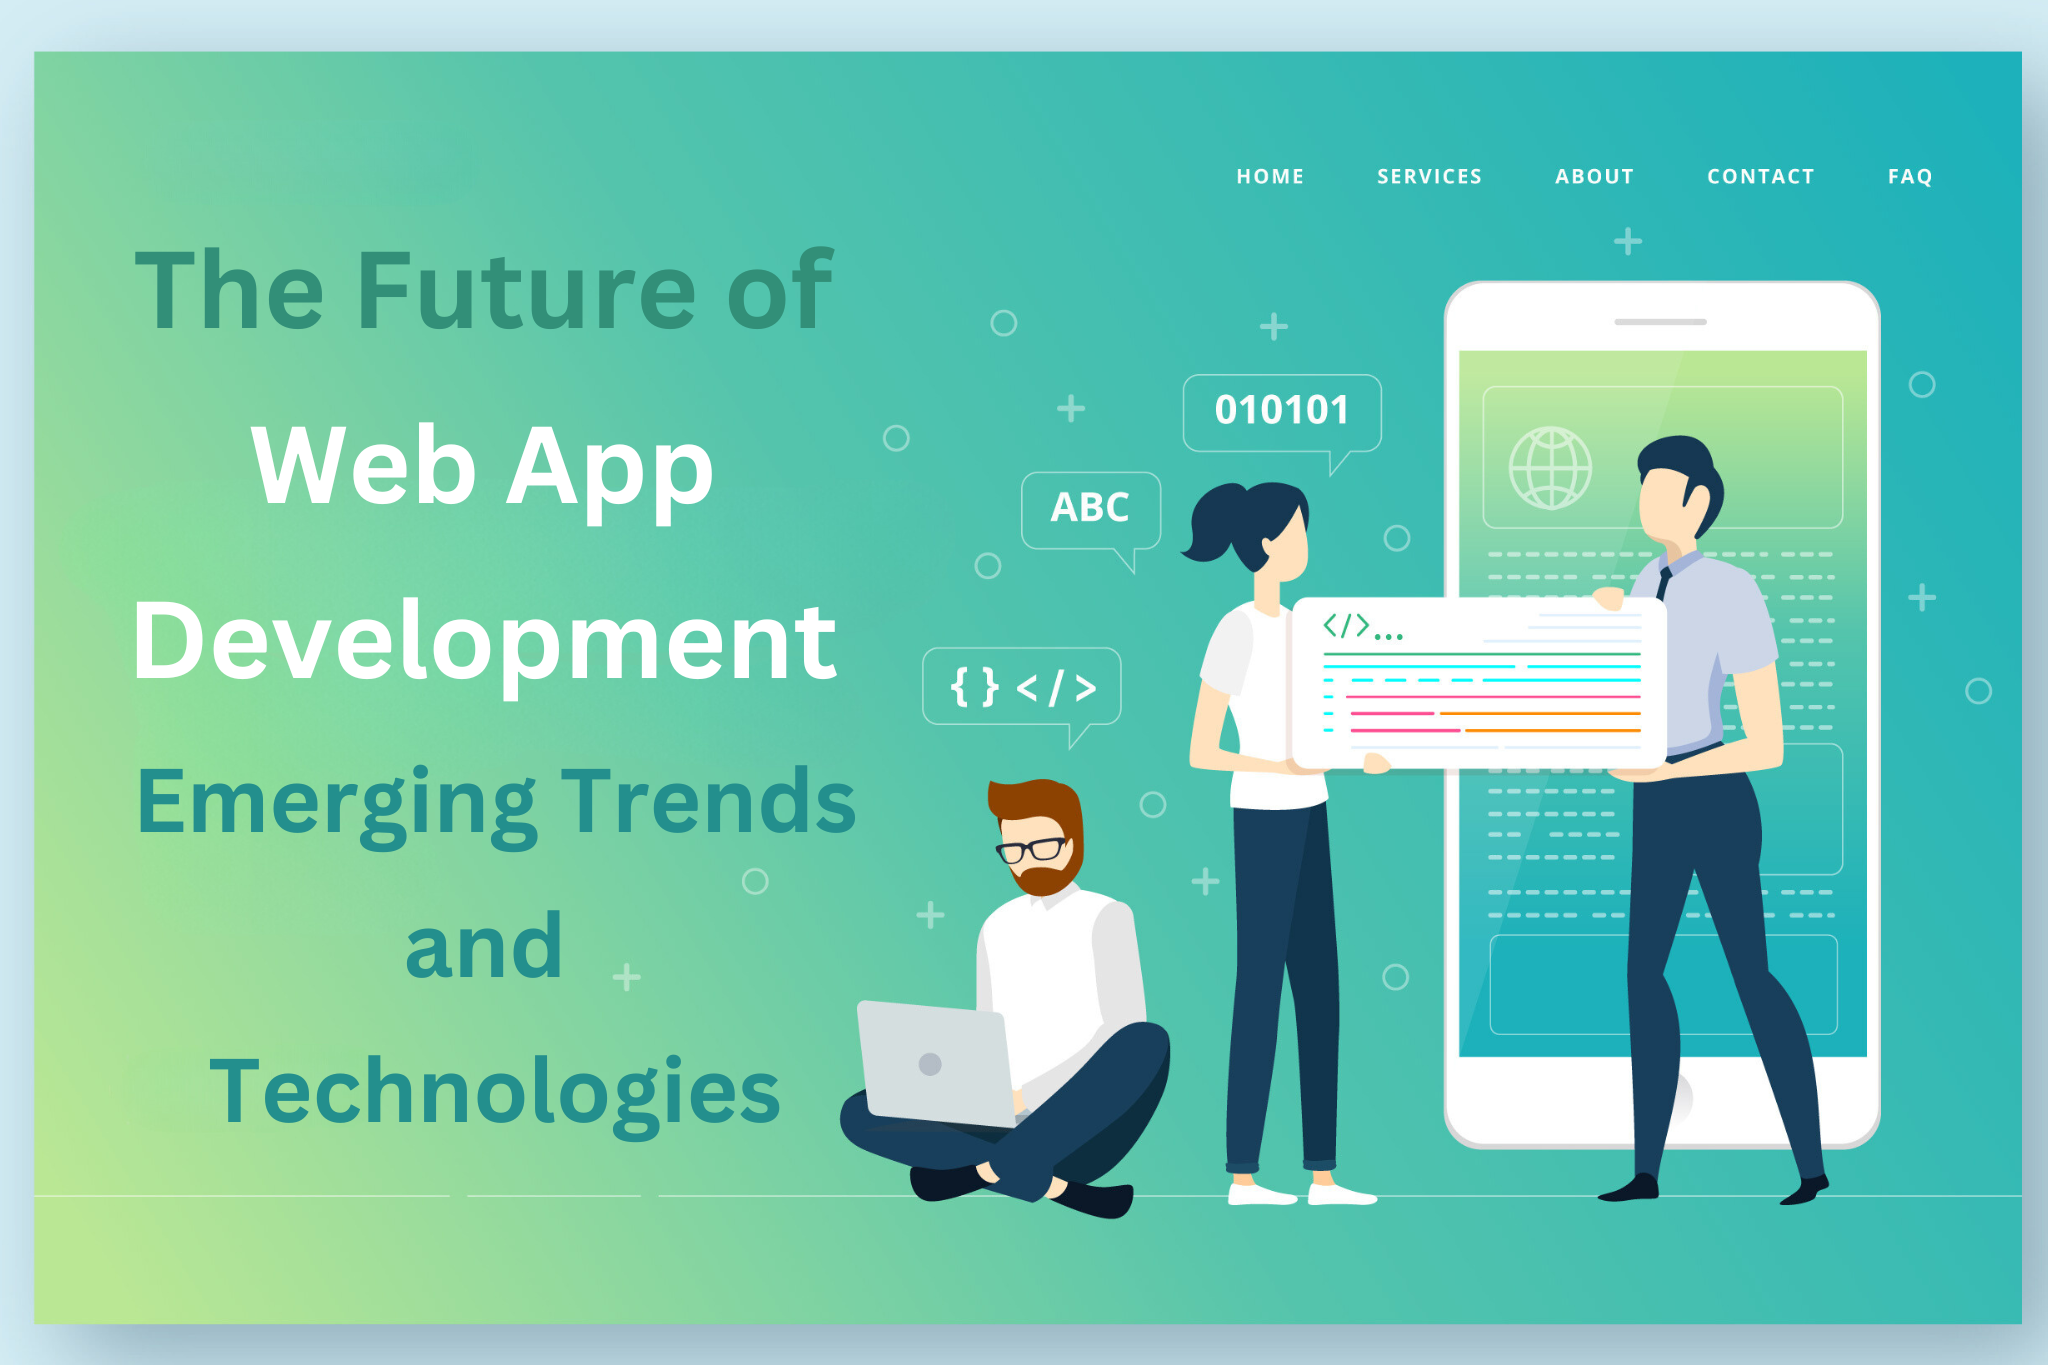 The Future of Web App Development: Emerging Trends and Technologies